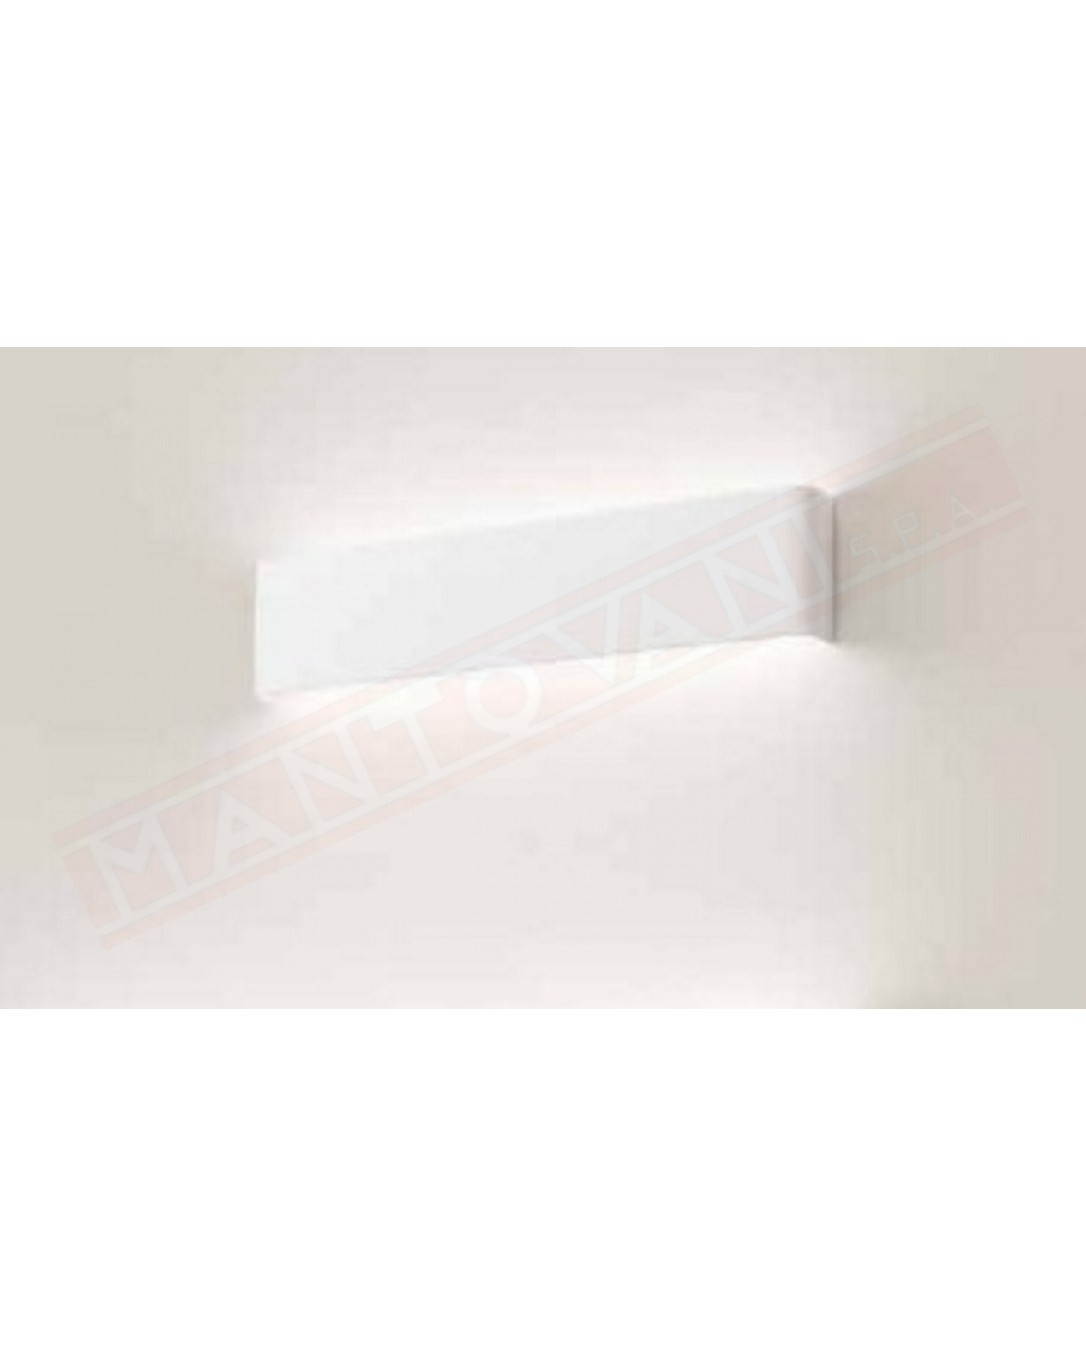 Perenz Way applique in metallobianco l.41 h. 9 sp 3.5 led 12w 1260lm 3000k